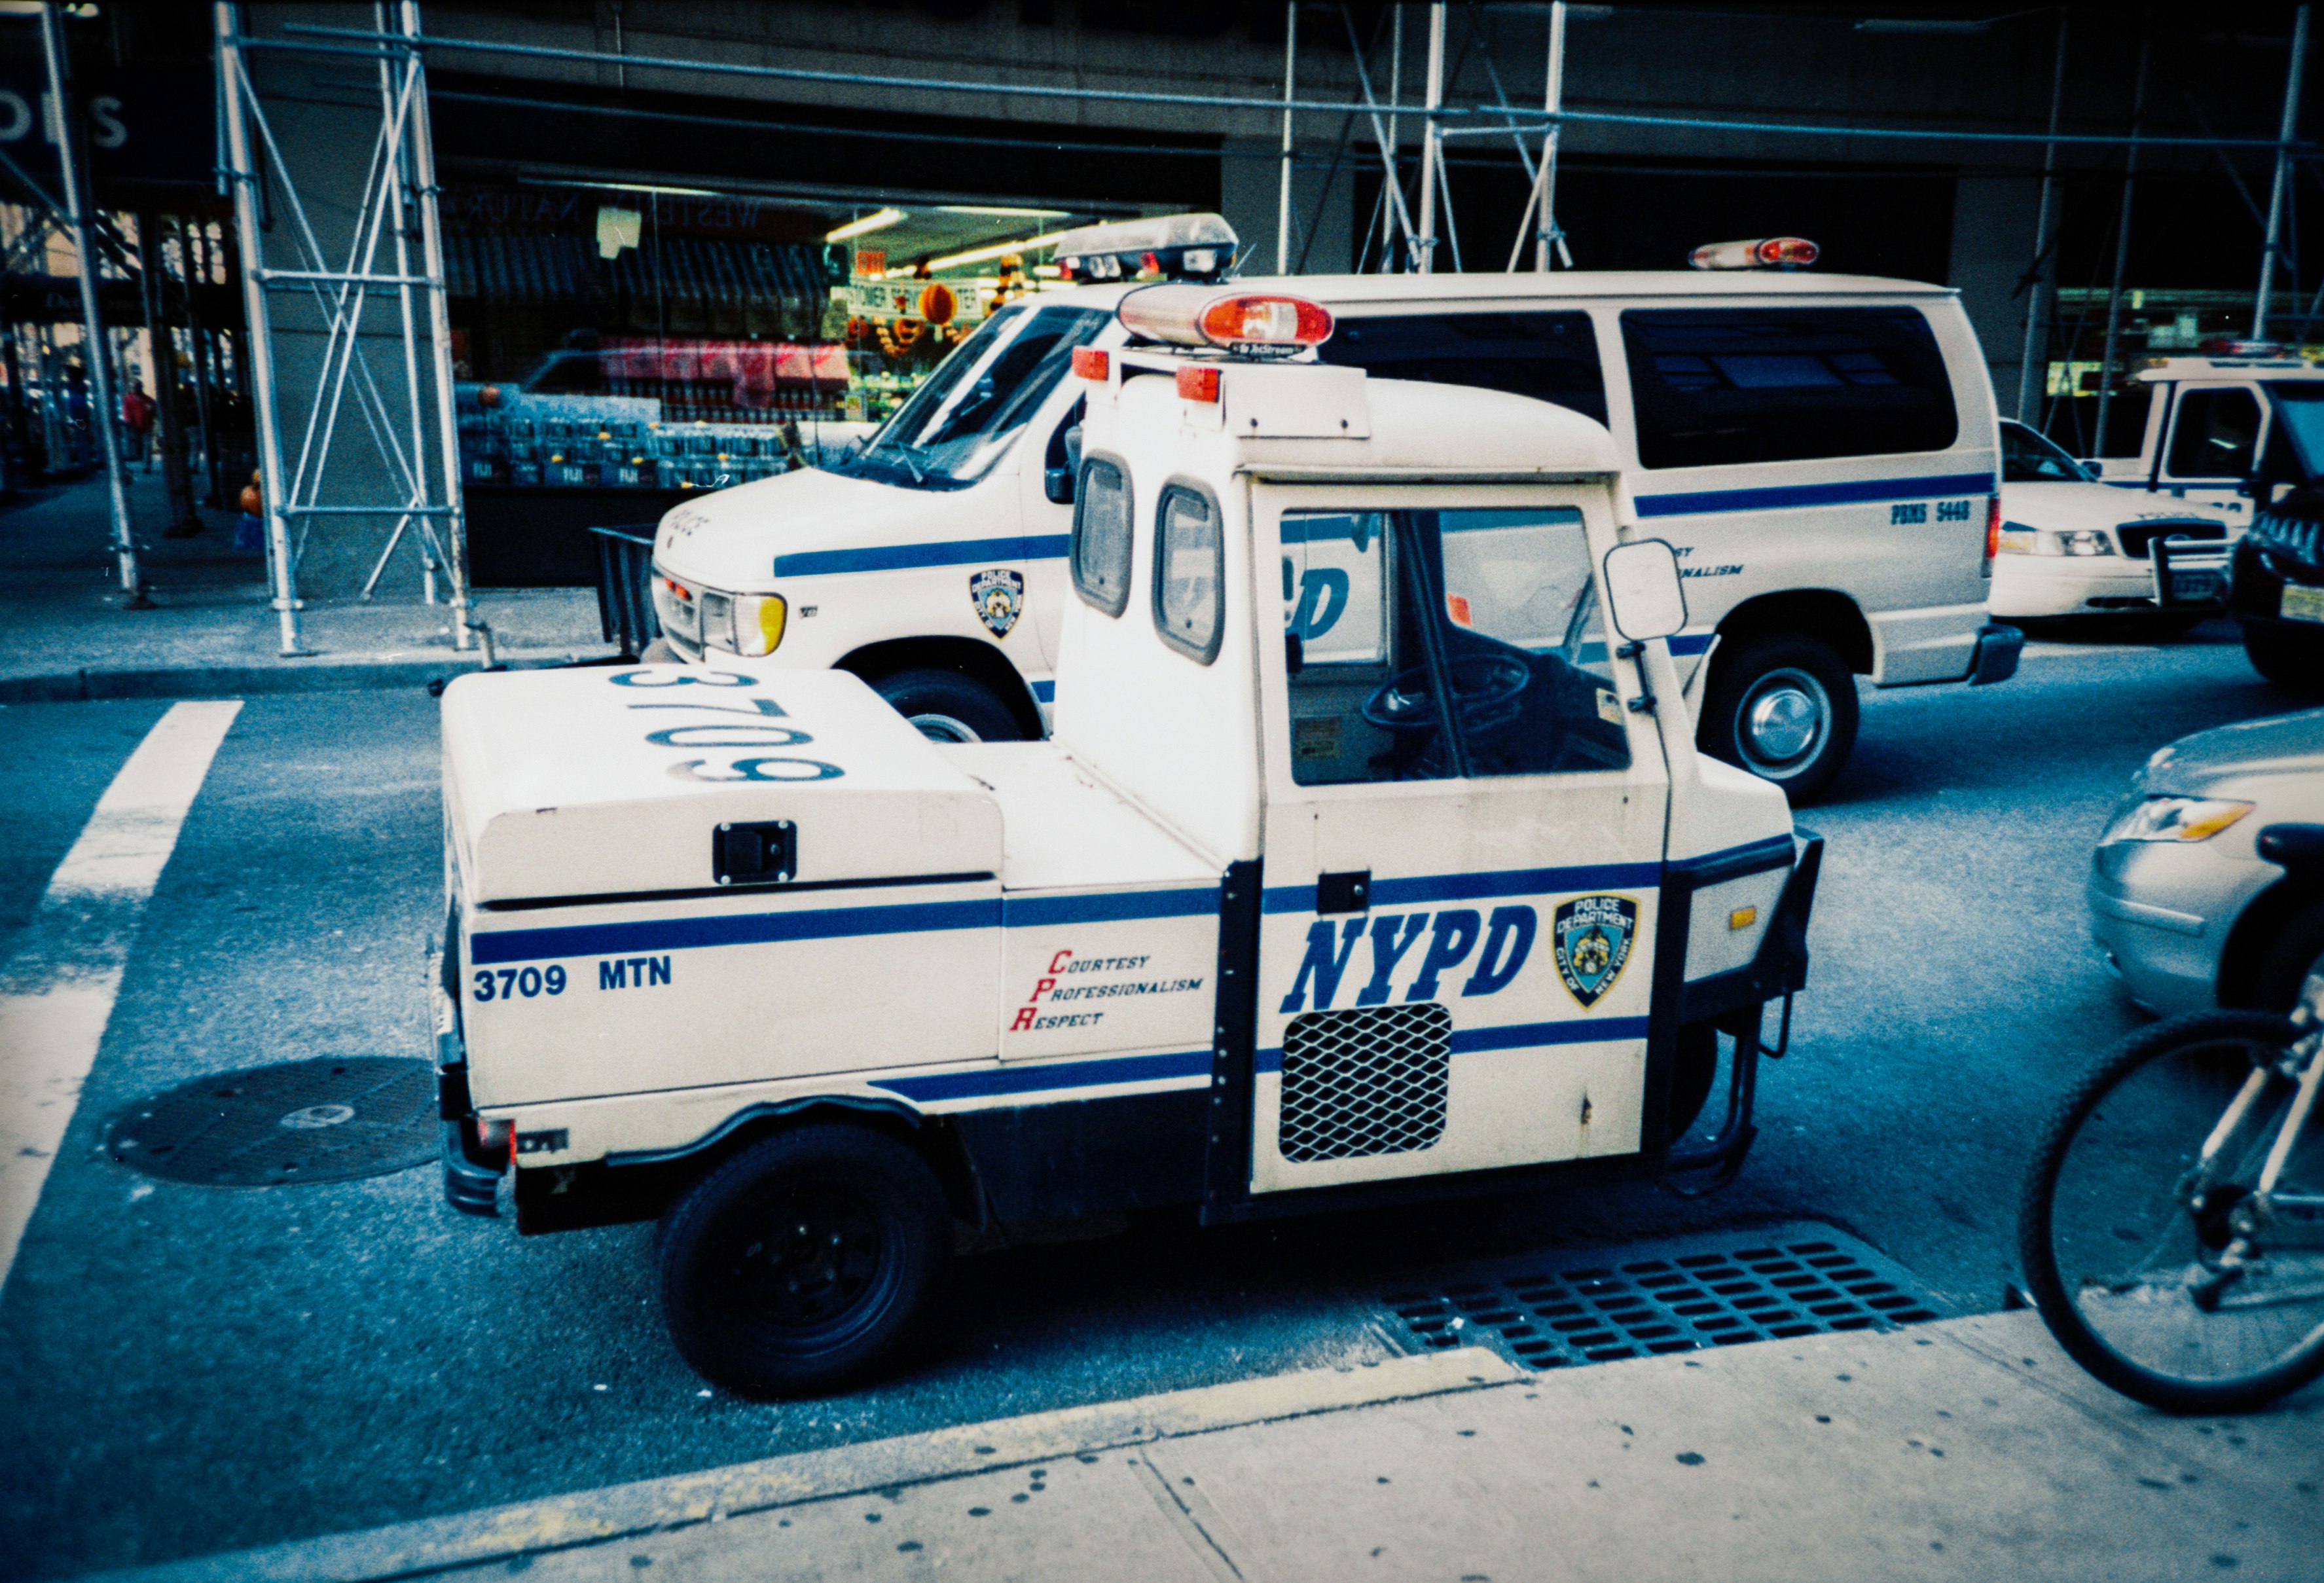 Old NYPD car